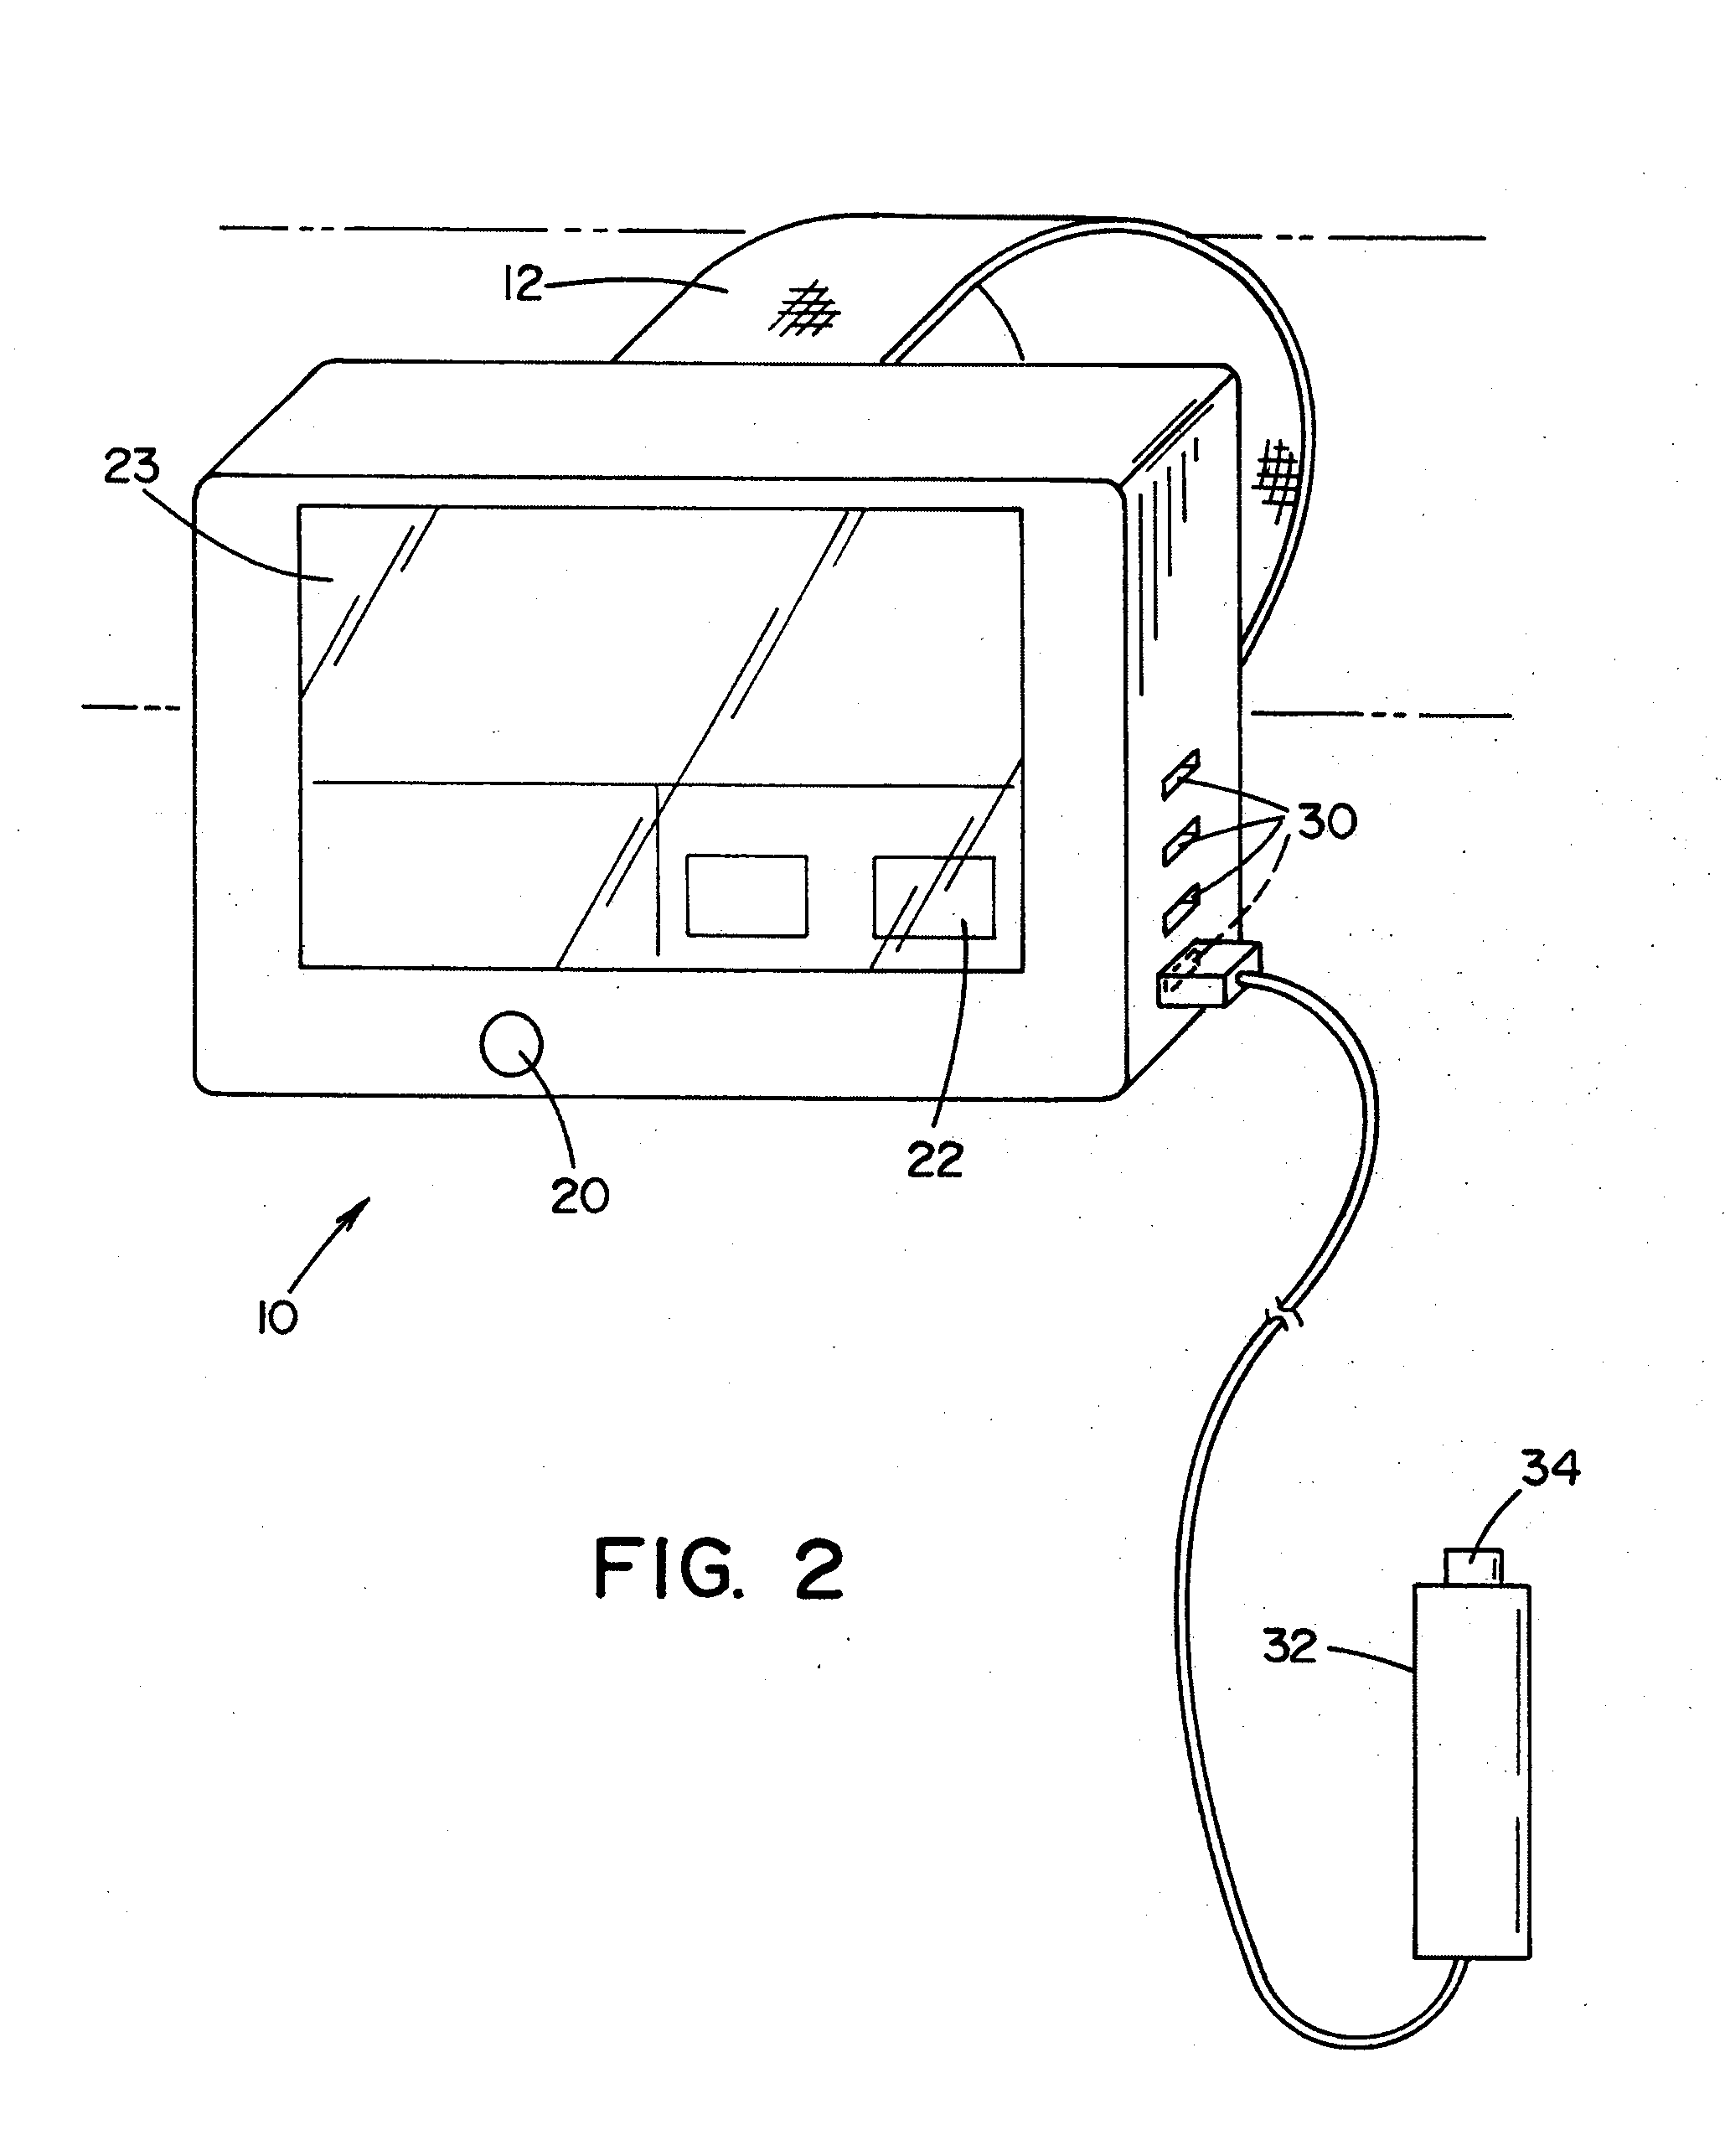 Pile installation and monitoring system and method of using the same